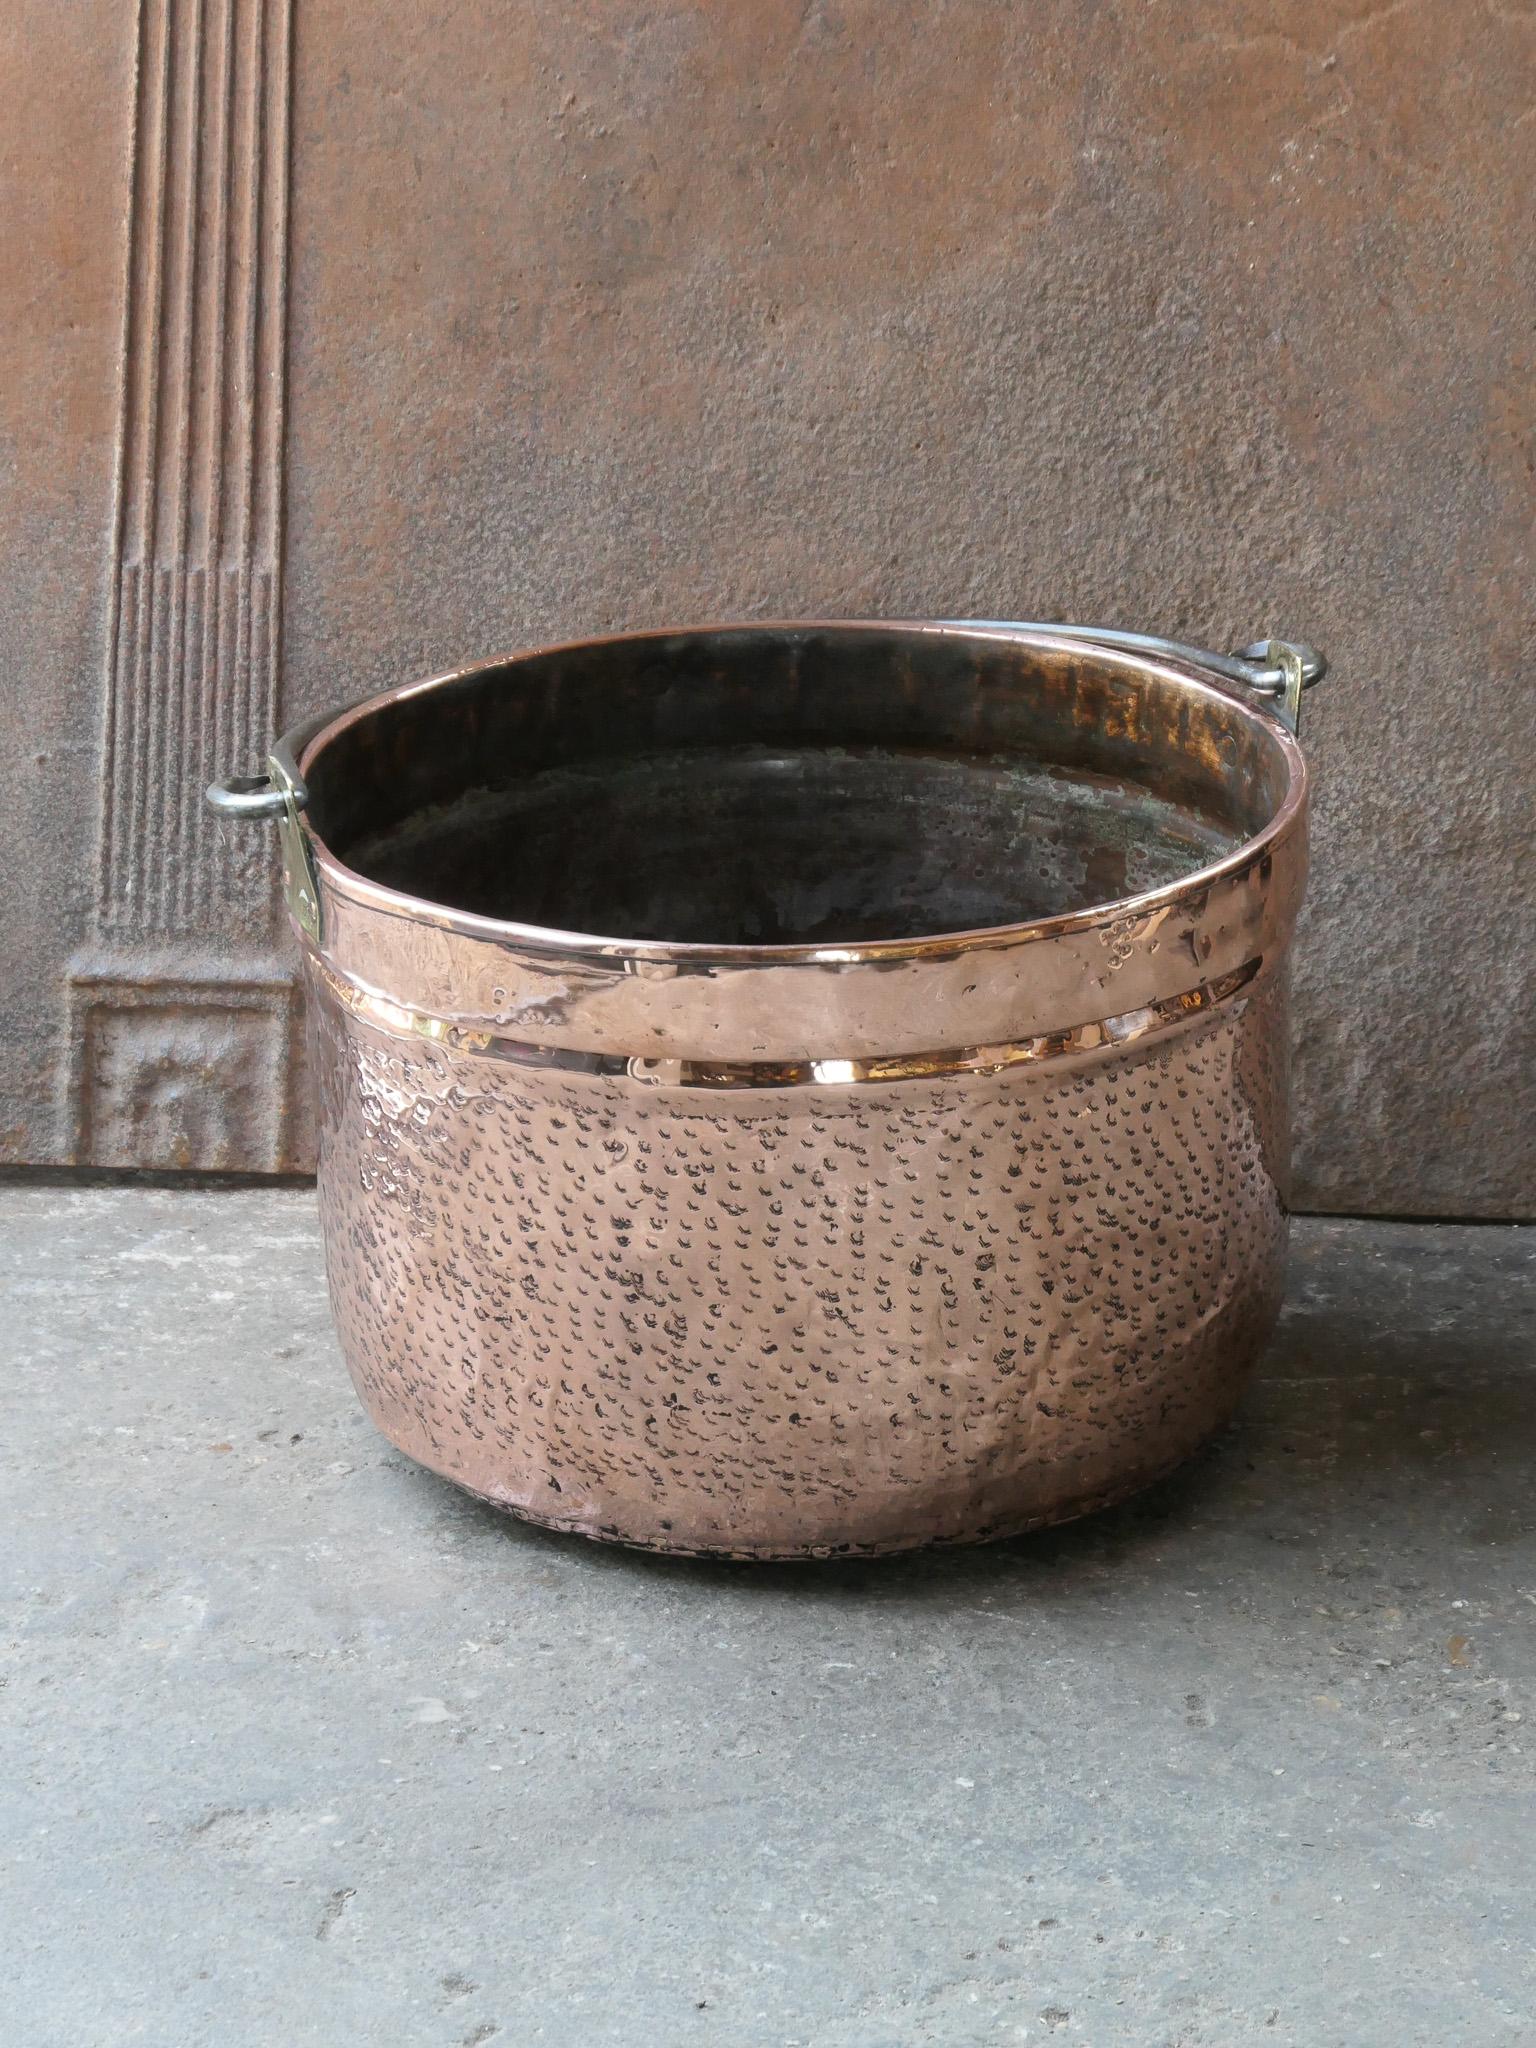 18th century Dutch log basket. The firewood basket is made of polished copper with brass details and has a wrought iron handle. Also called 'aker'. Used to draw water from the well and cook over an open fire.

The log holder is in a good condition